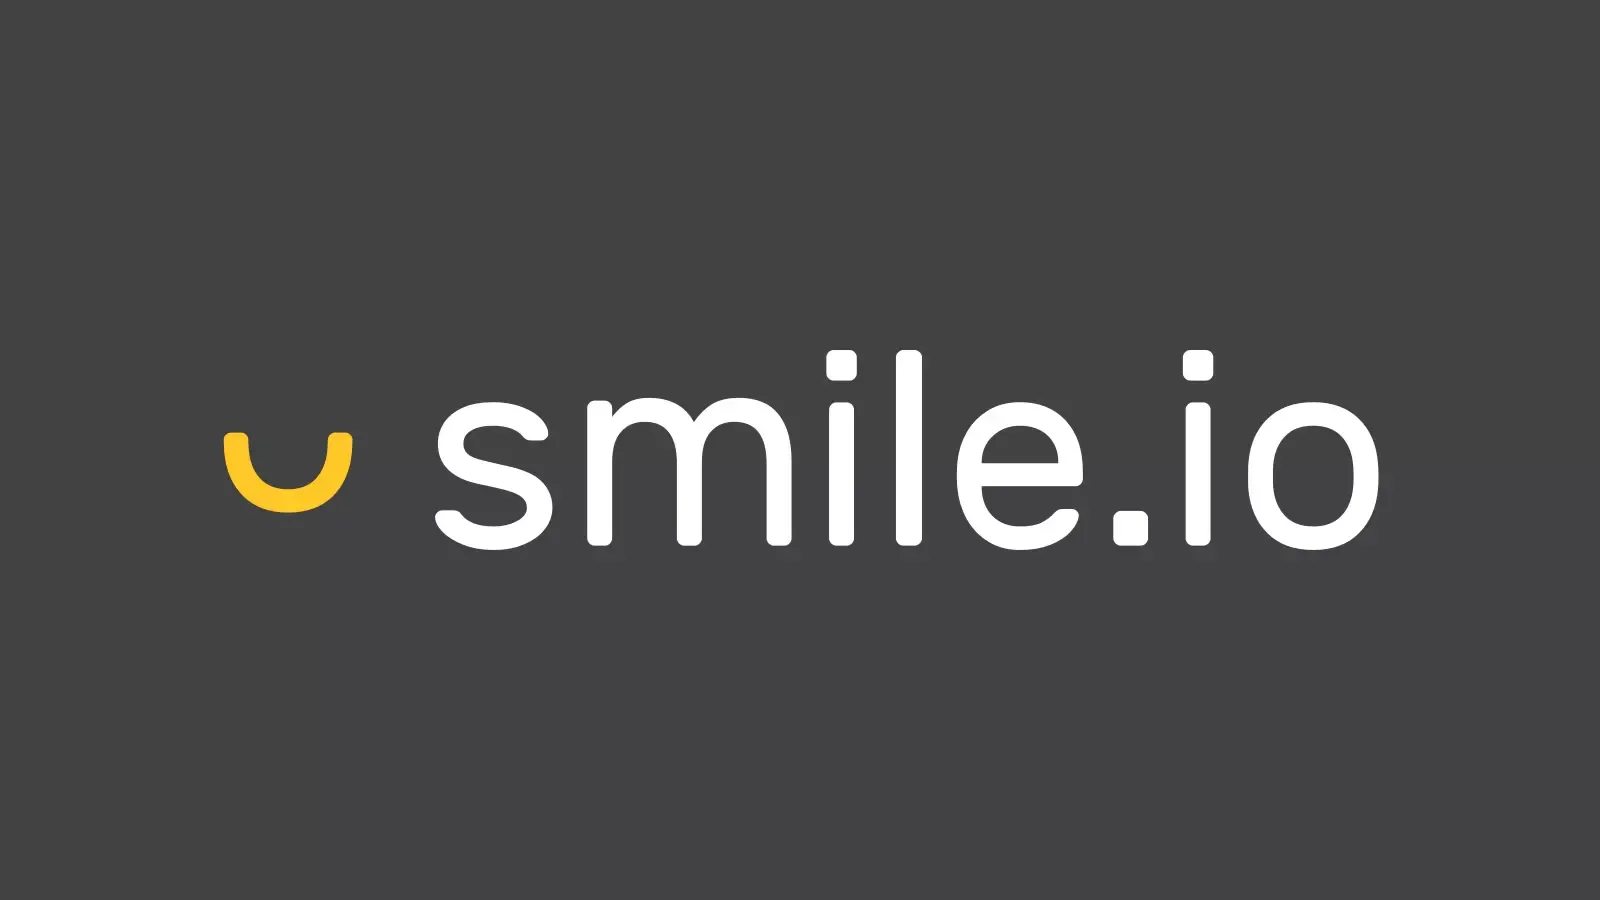 Smile.io is rightfully considered to be one of the top Shopify apps